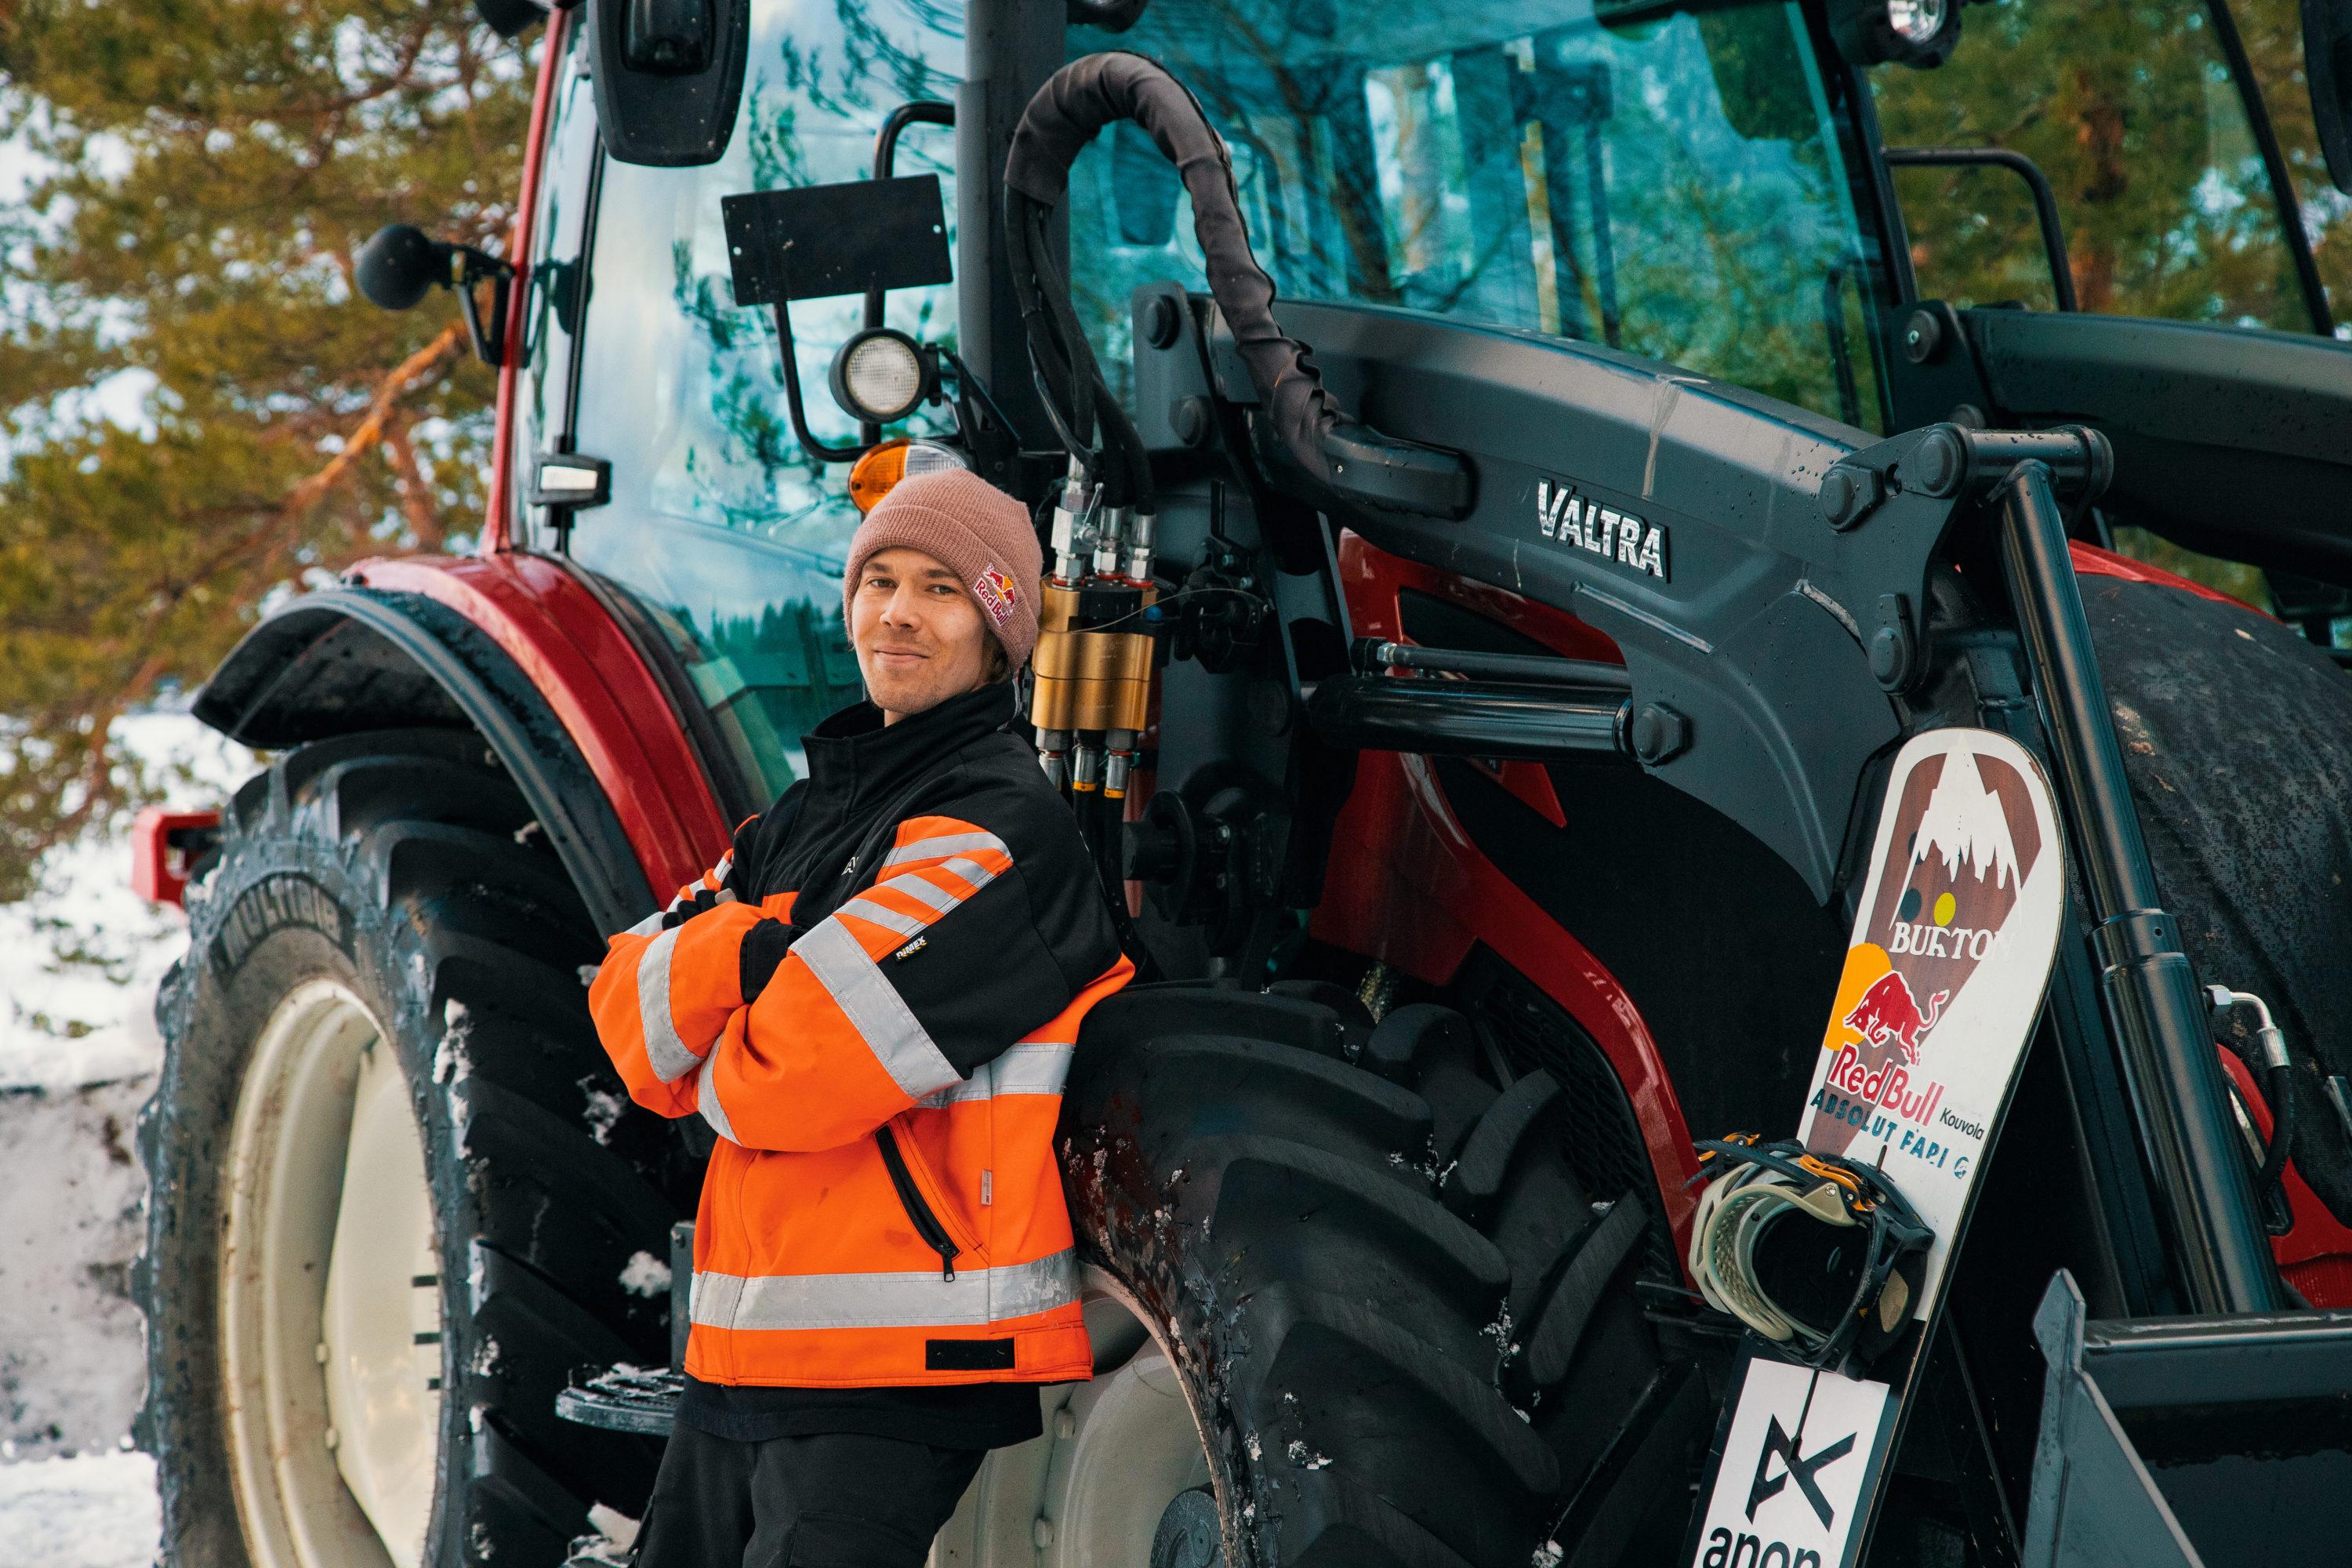 Snowboarder Roope Tonteri with his brand new Valtra A94 HiTech. Photo by Sami Malmberg